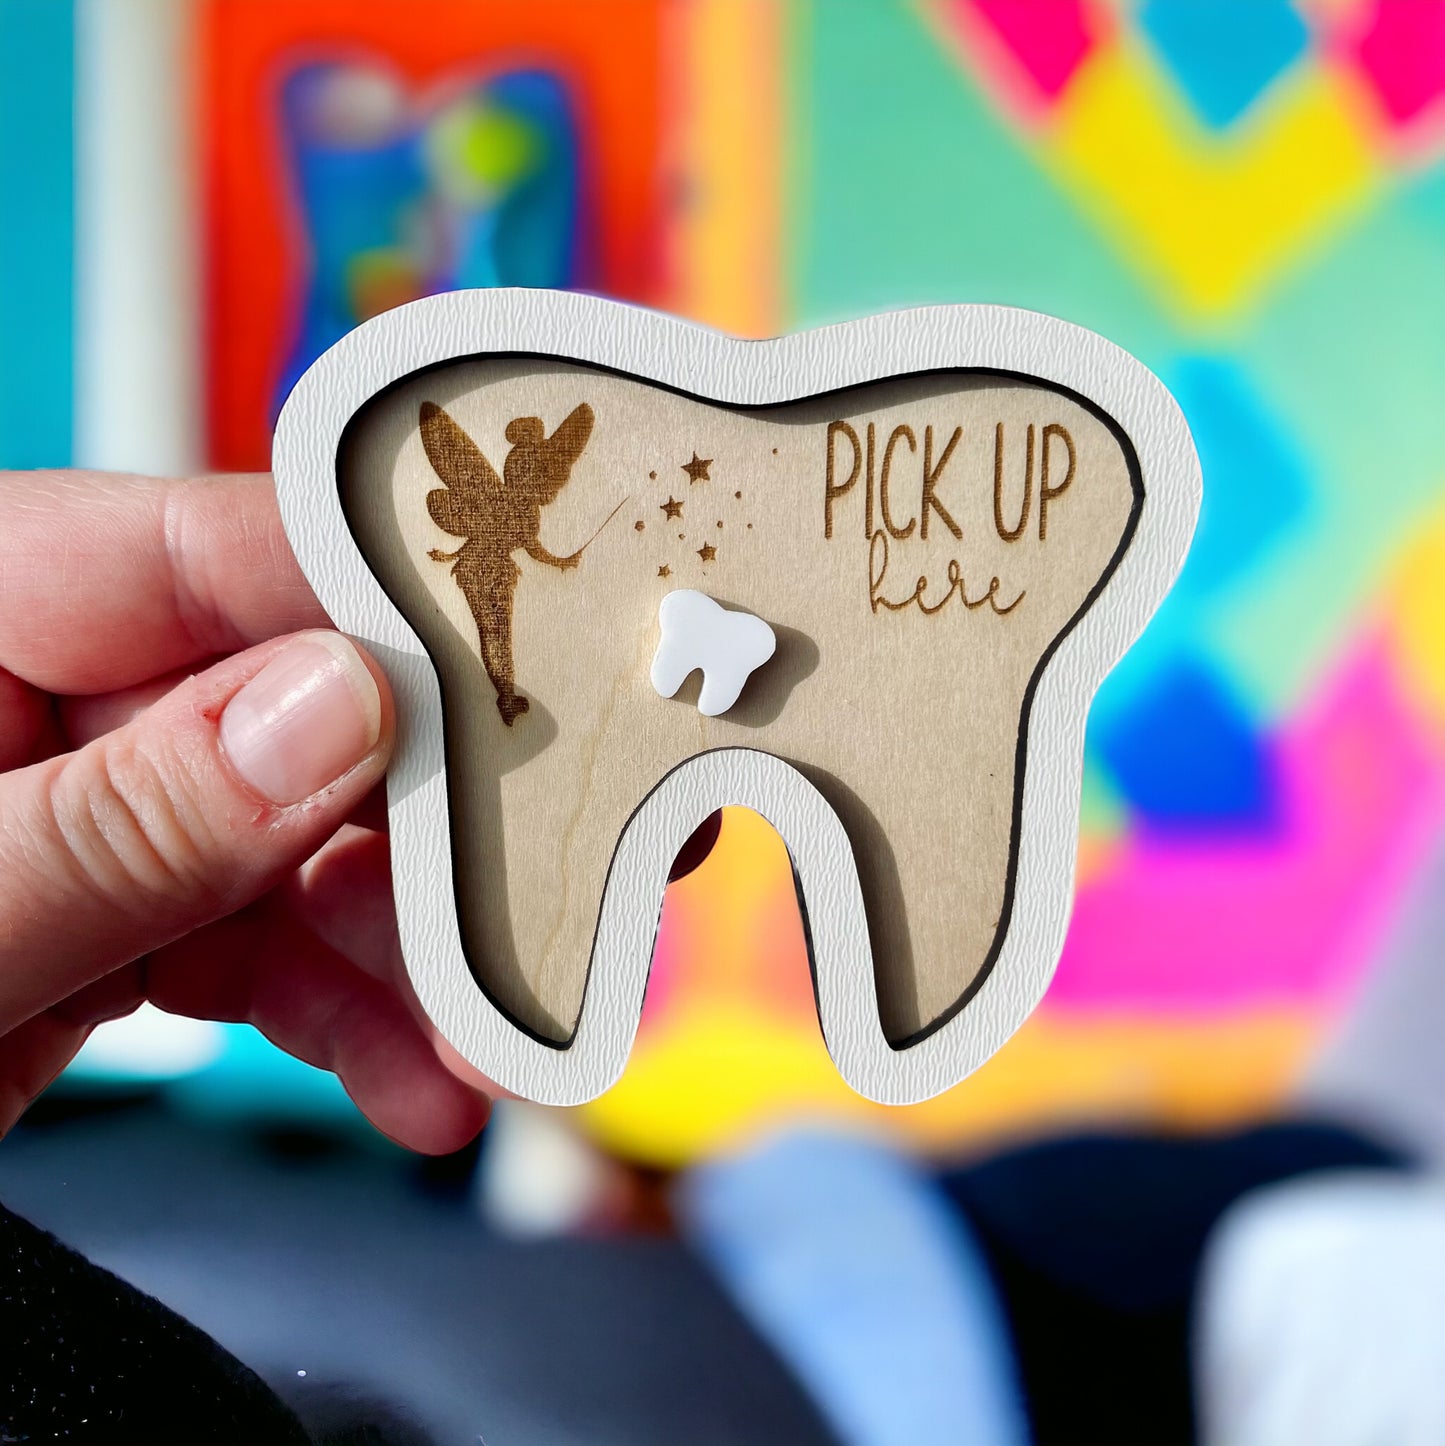 Tooth Fairy Personalized Set